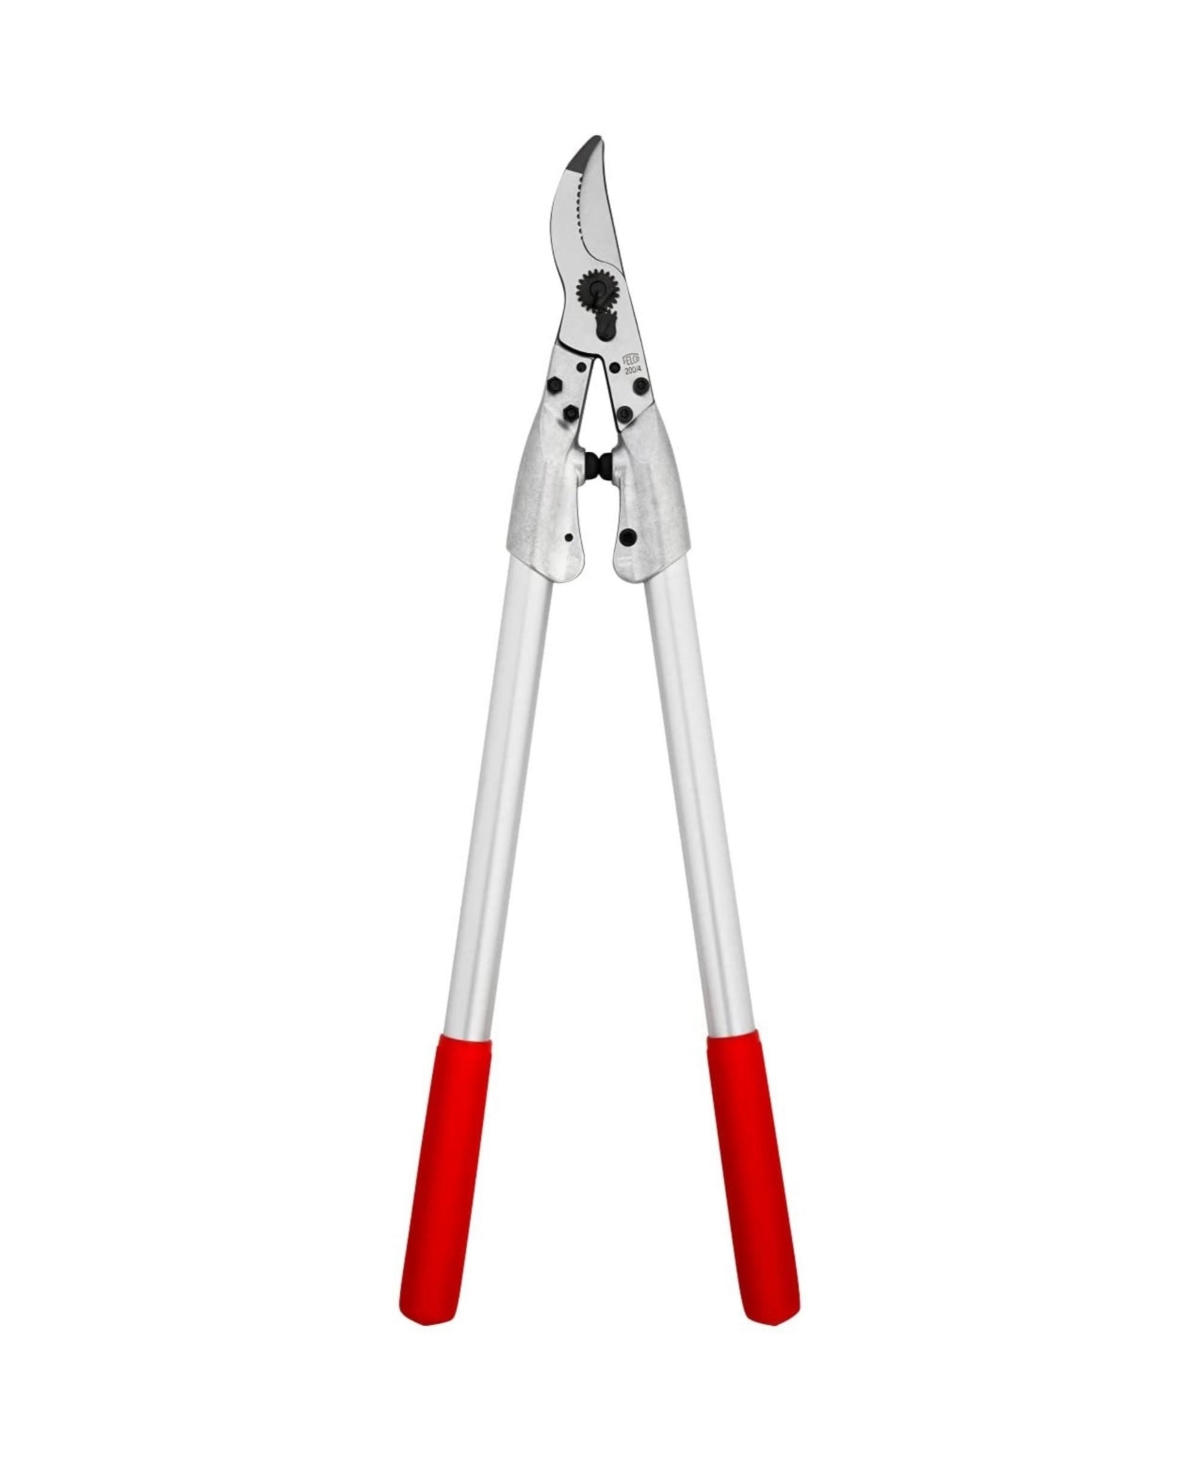 Felco F-300 Picking and Trimming Clean Cut Garden Snips